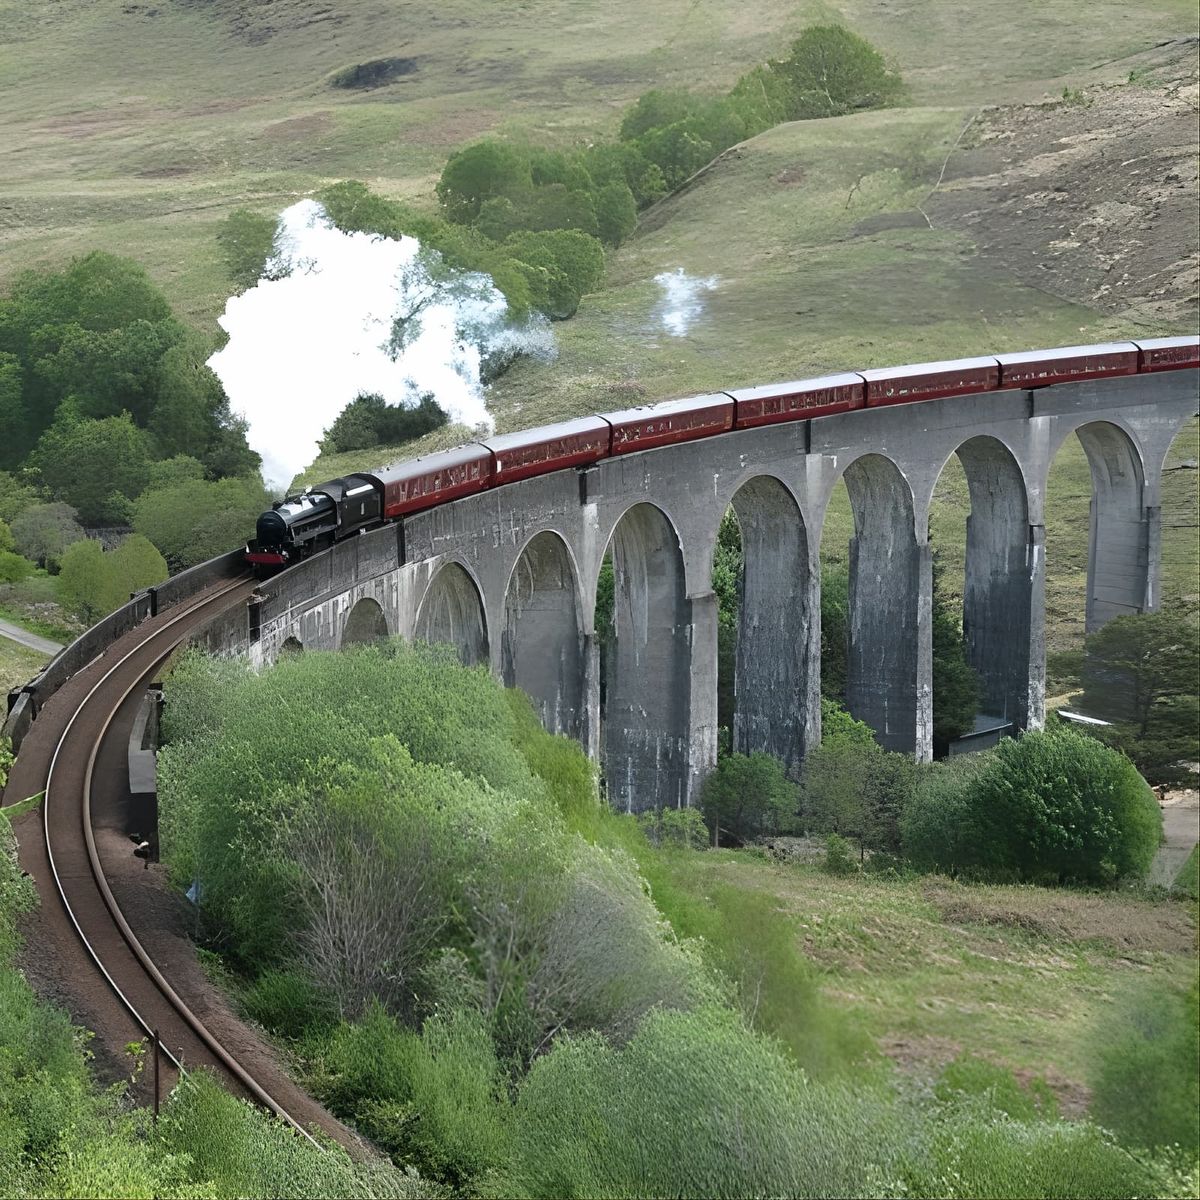 The Magical Highland Tour Including the Jacobite Steam Train Journey